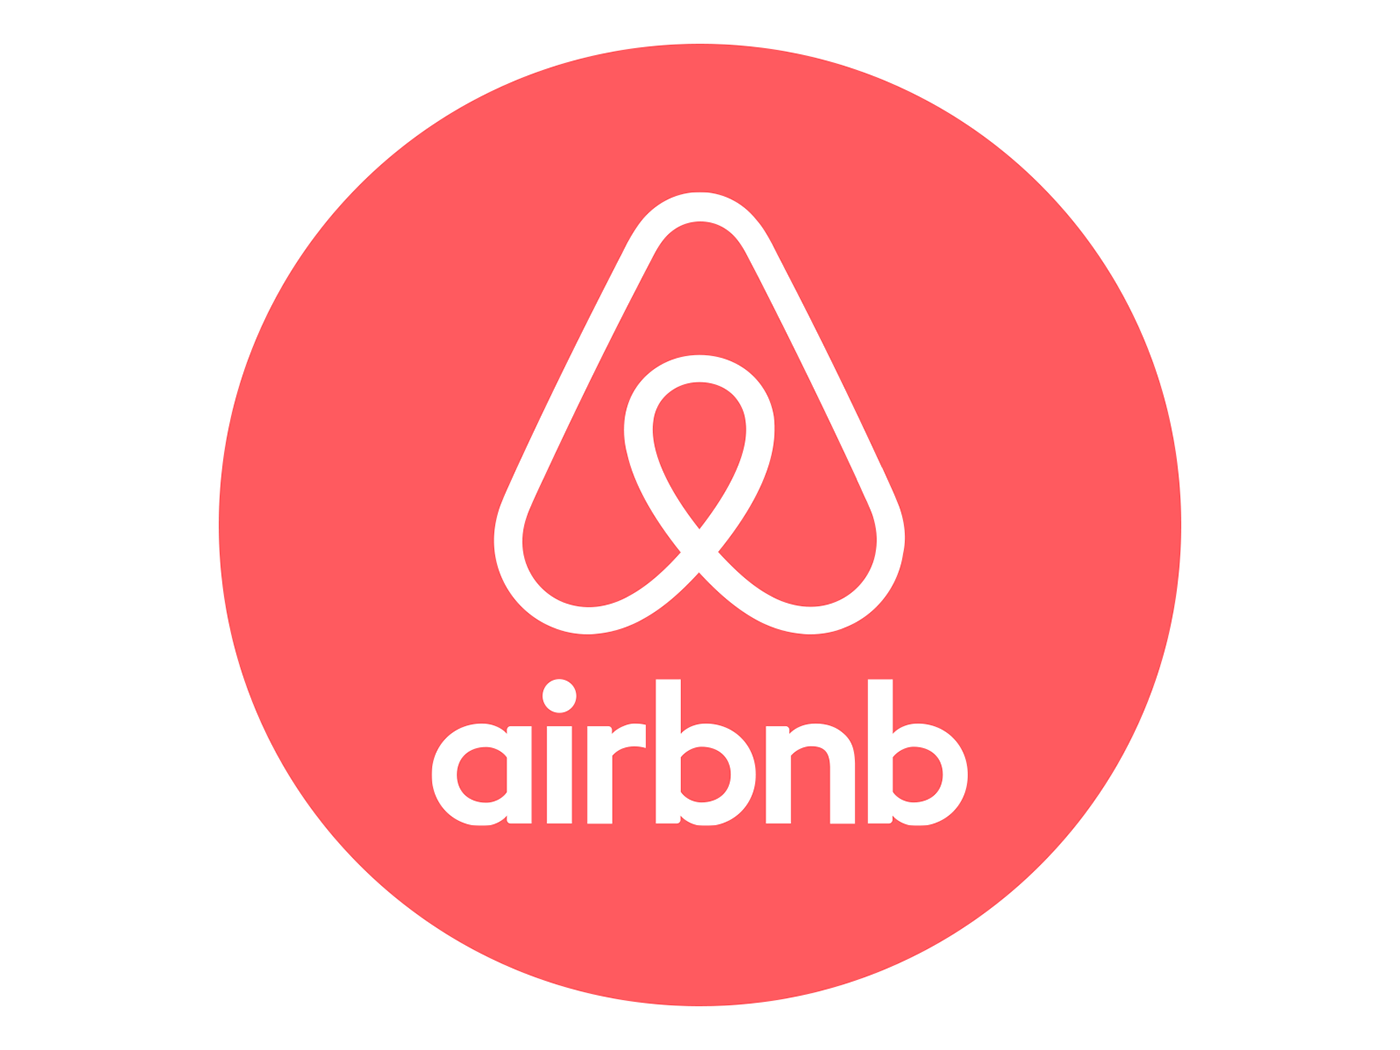 airbnb and b stock